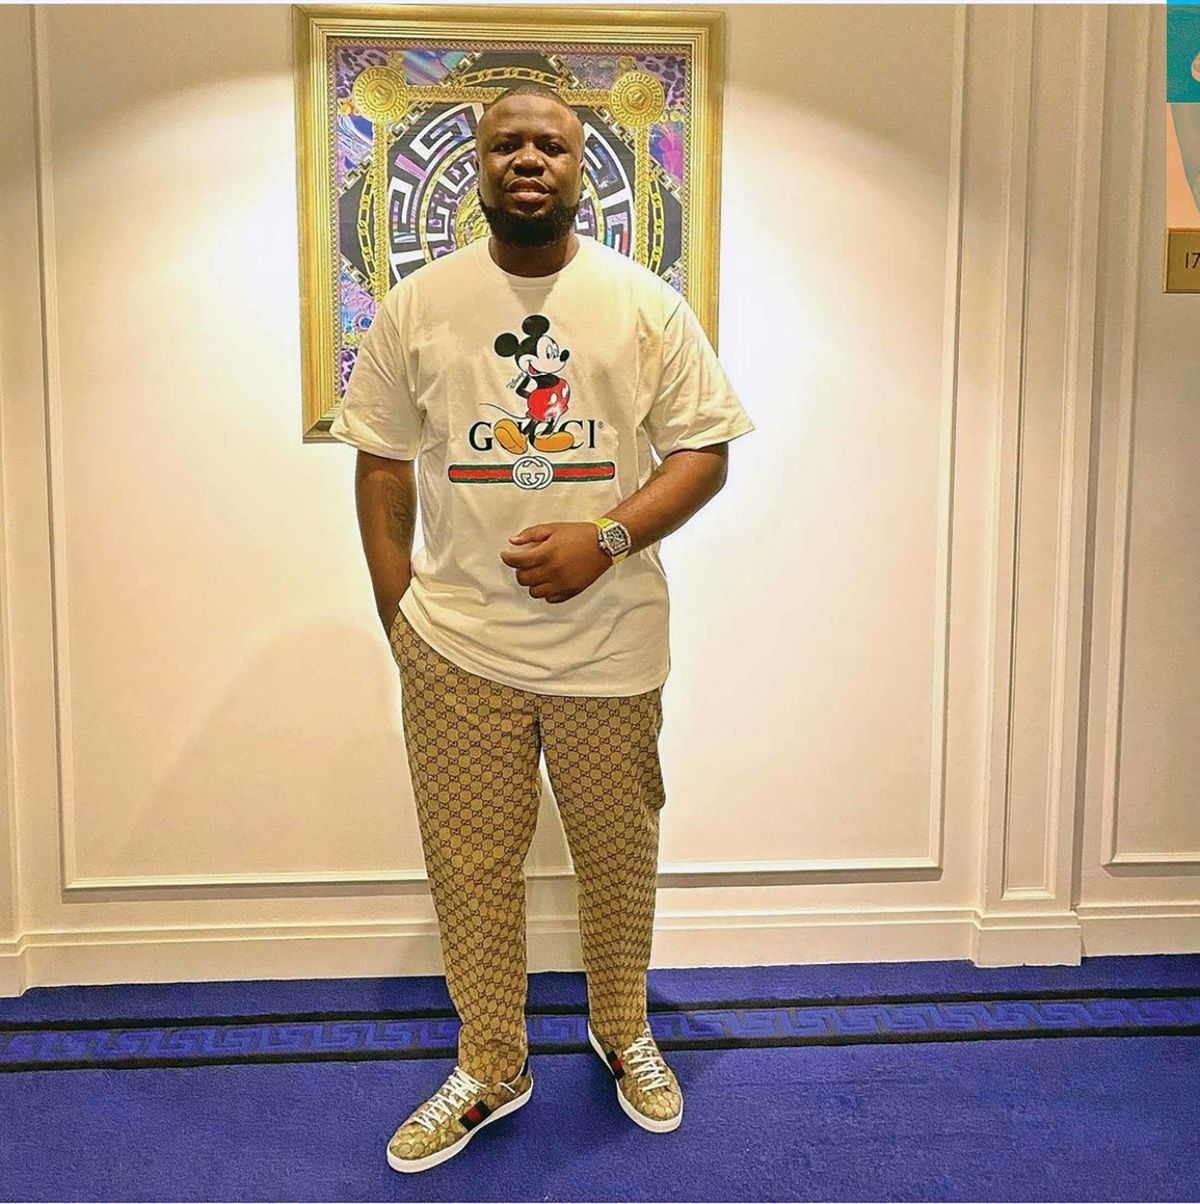 HushPuppi sentenced to 11 years in prison for fraud